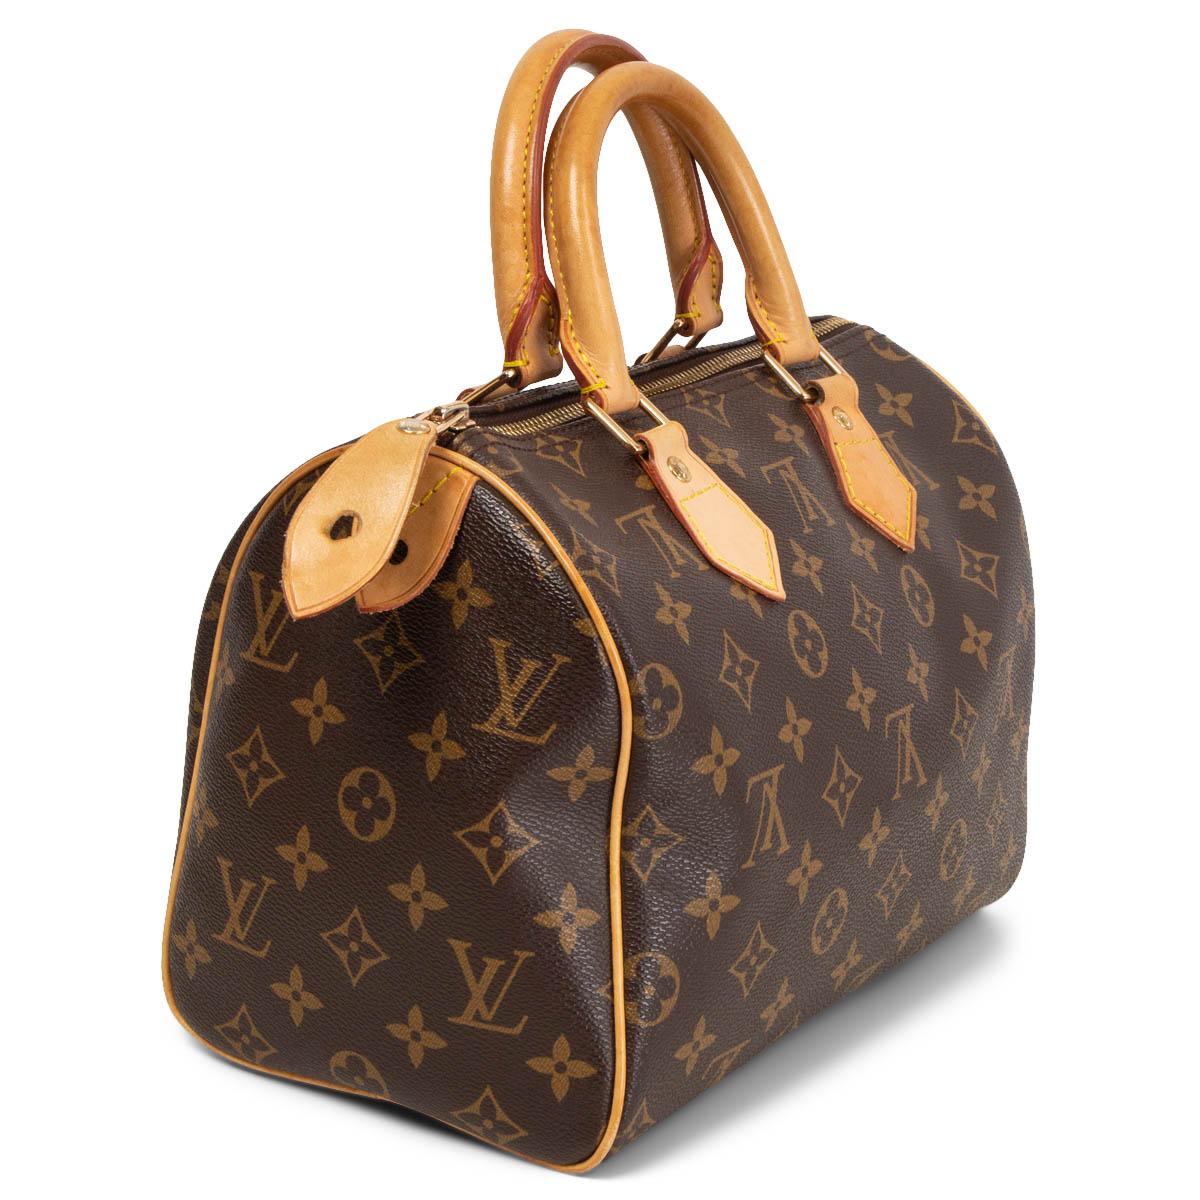 100% authentic Louis Vuitton Speedy 25 in brown Monogram coated canvas. Has been carried with some soft patina to the leather. Overall in excellent condition. Come with dust bag. 

Measurements
Height	19cm (7.4in)
Width	25cm (9.8in)
Depth	15cm